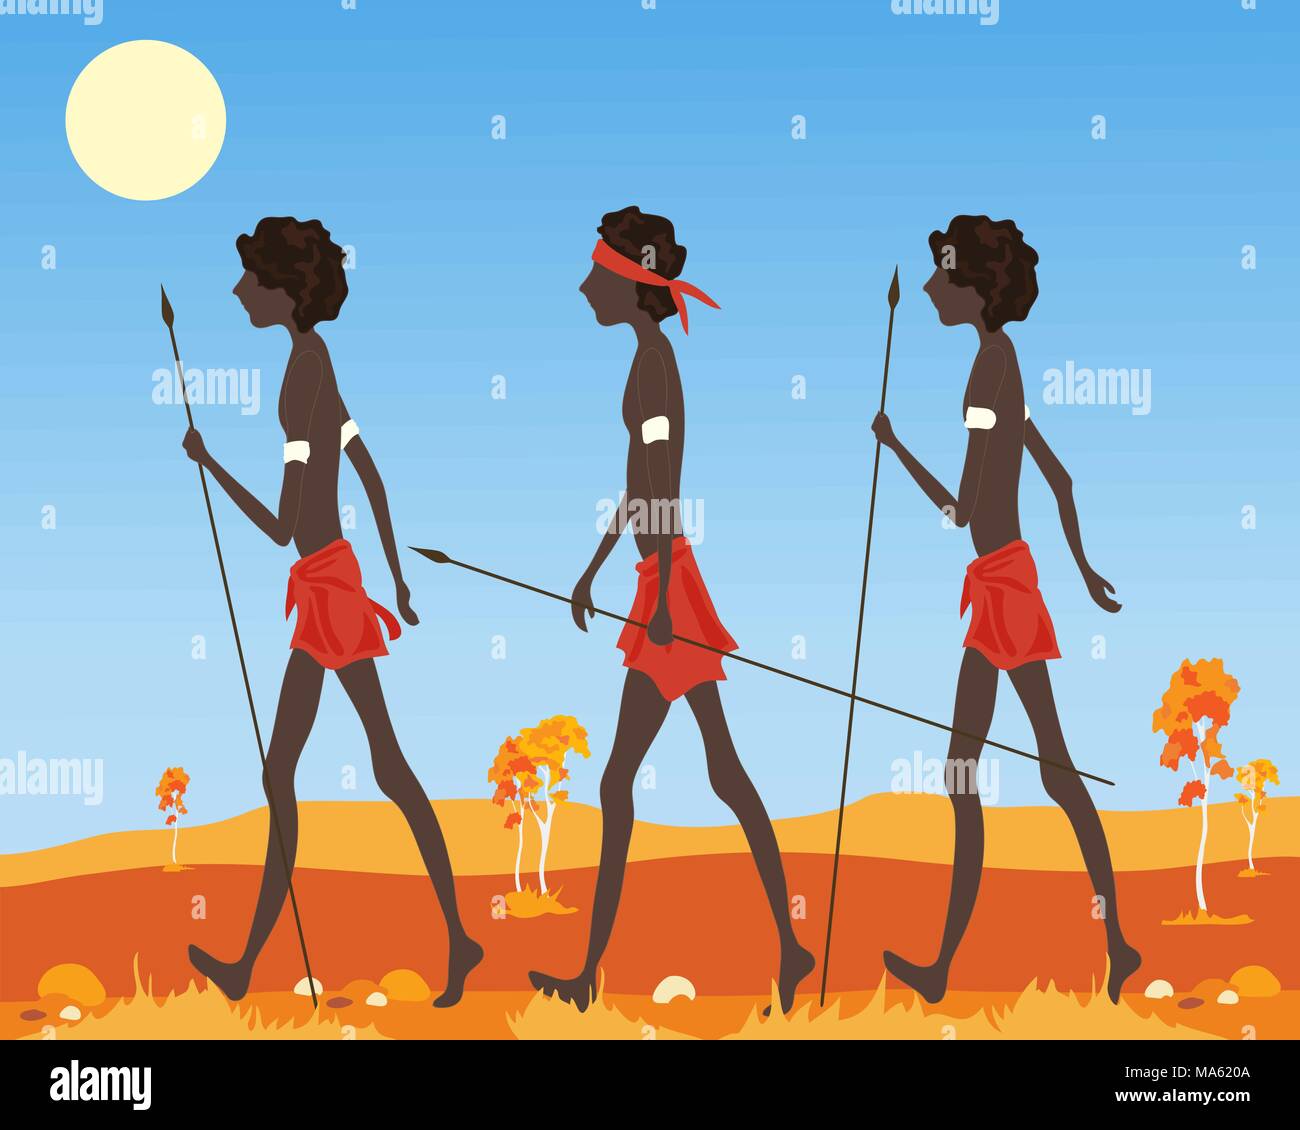 a vector illustration in eps 10 format of a three Australian aborigine men dressed in traditional clothing walking in the outback Stock Vector